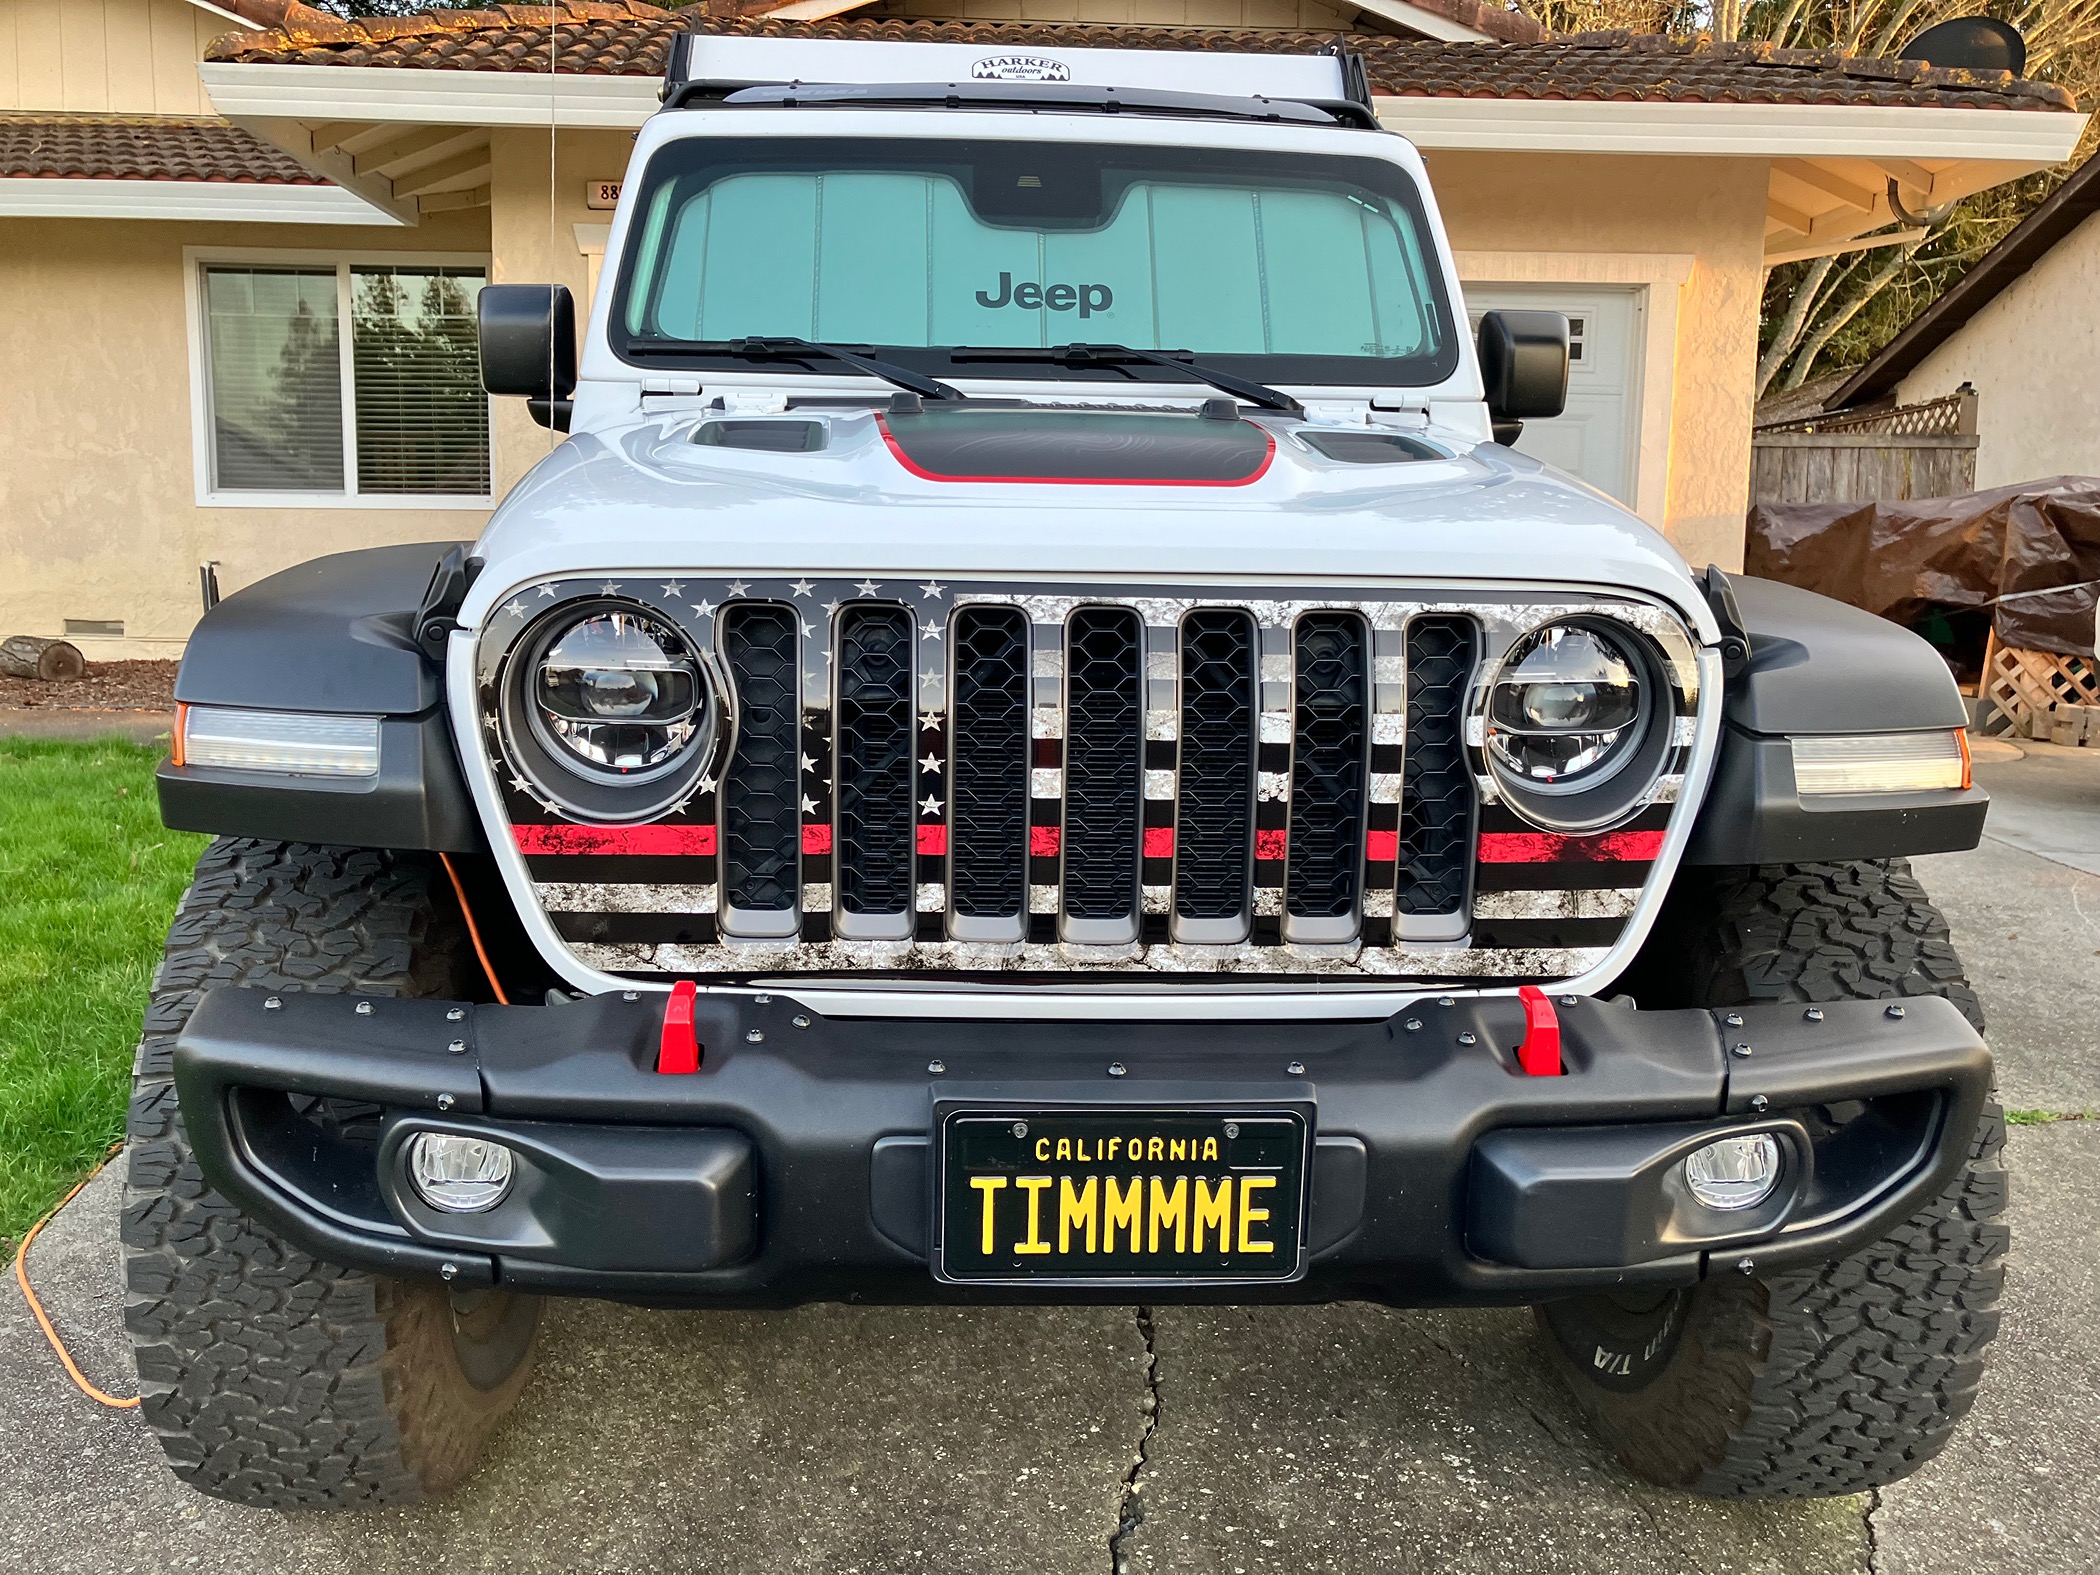 Jeep Gladiator Front End Friday!! Let's see those Gladiator Front Ends! IMG_0047